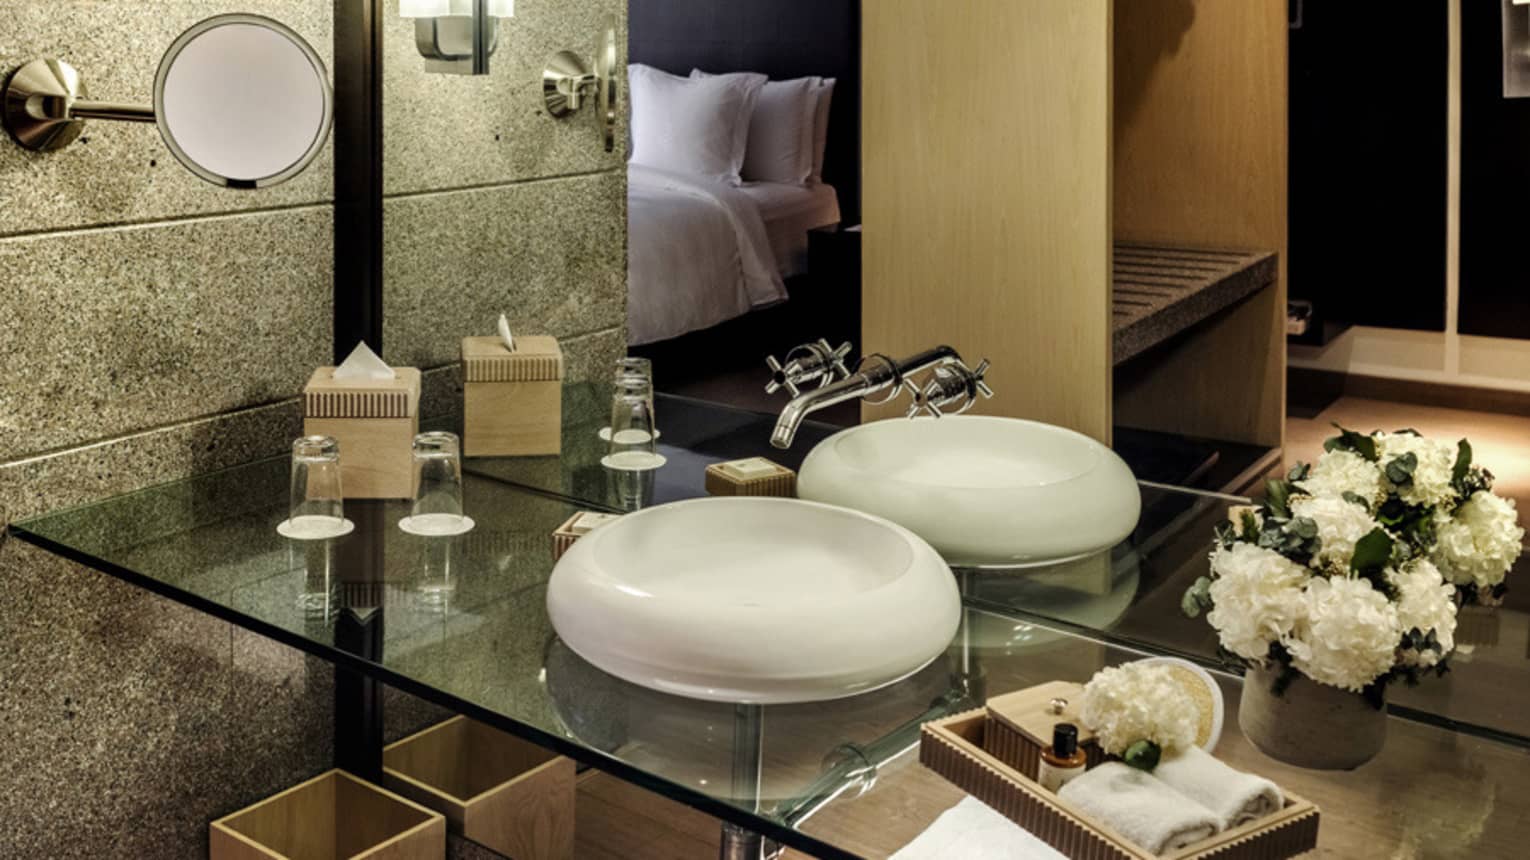 In-room bathroom featuring a glass vanity with a white round porcelain sink